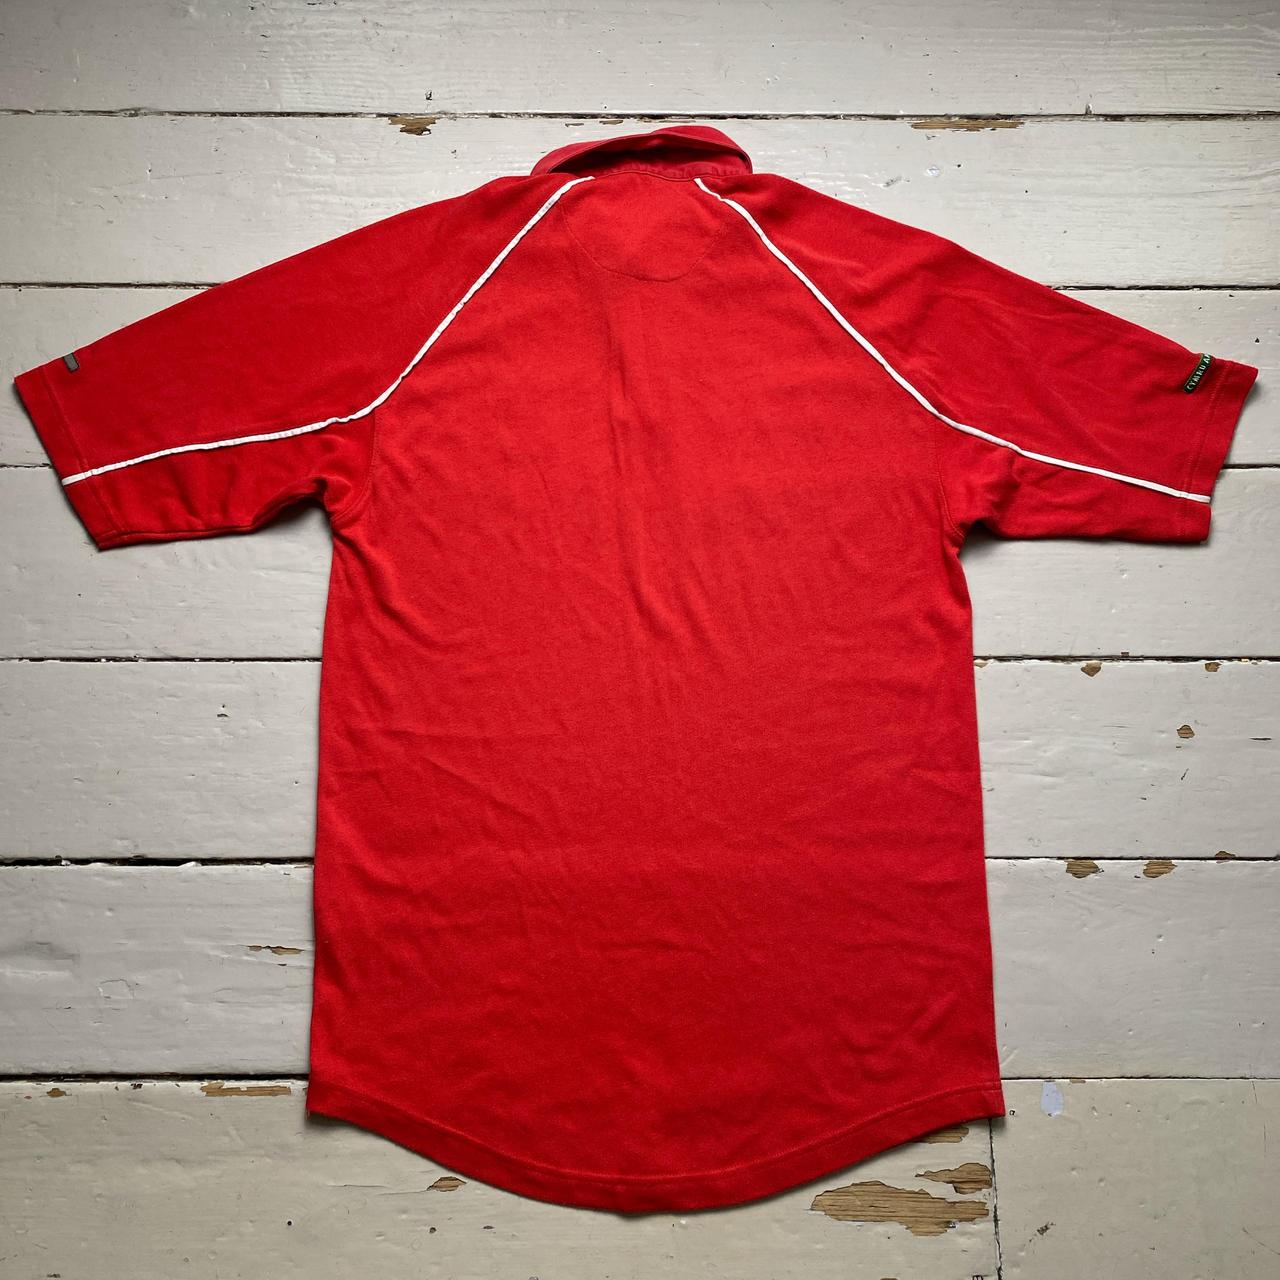 Wales Reebok Vintage Rugby Jersey Red and White